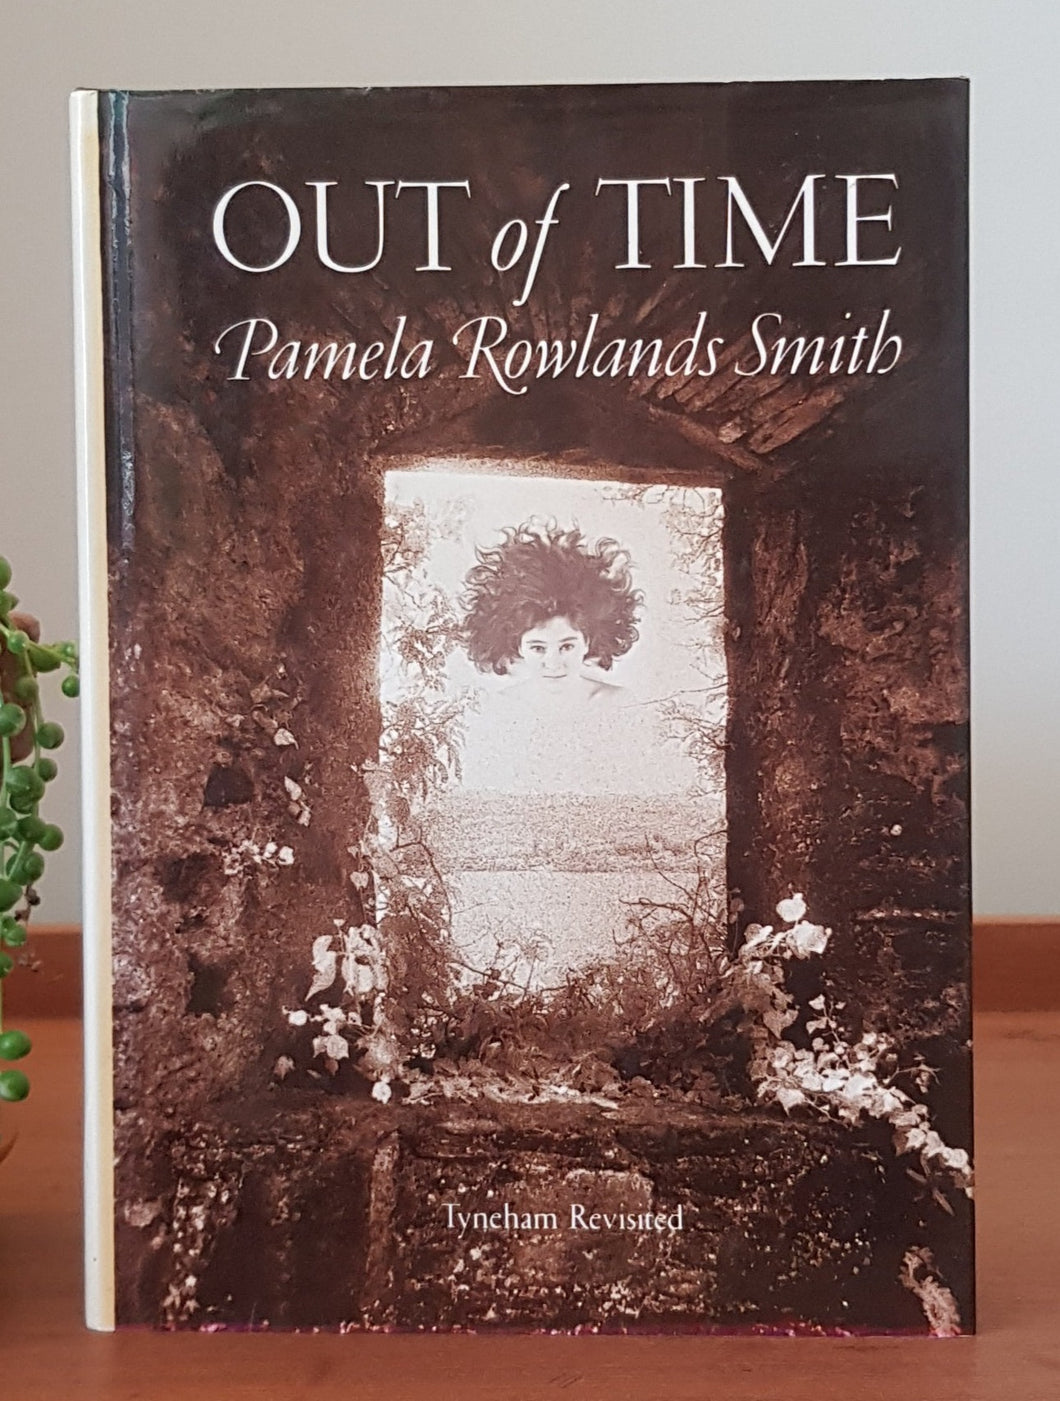 Out of Time: Tyneham Revisted by Pamela Rowlands Smith